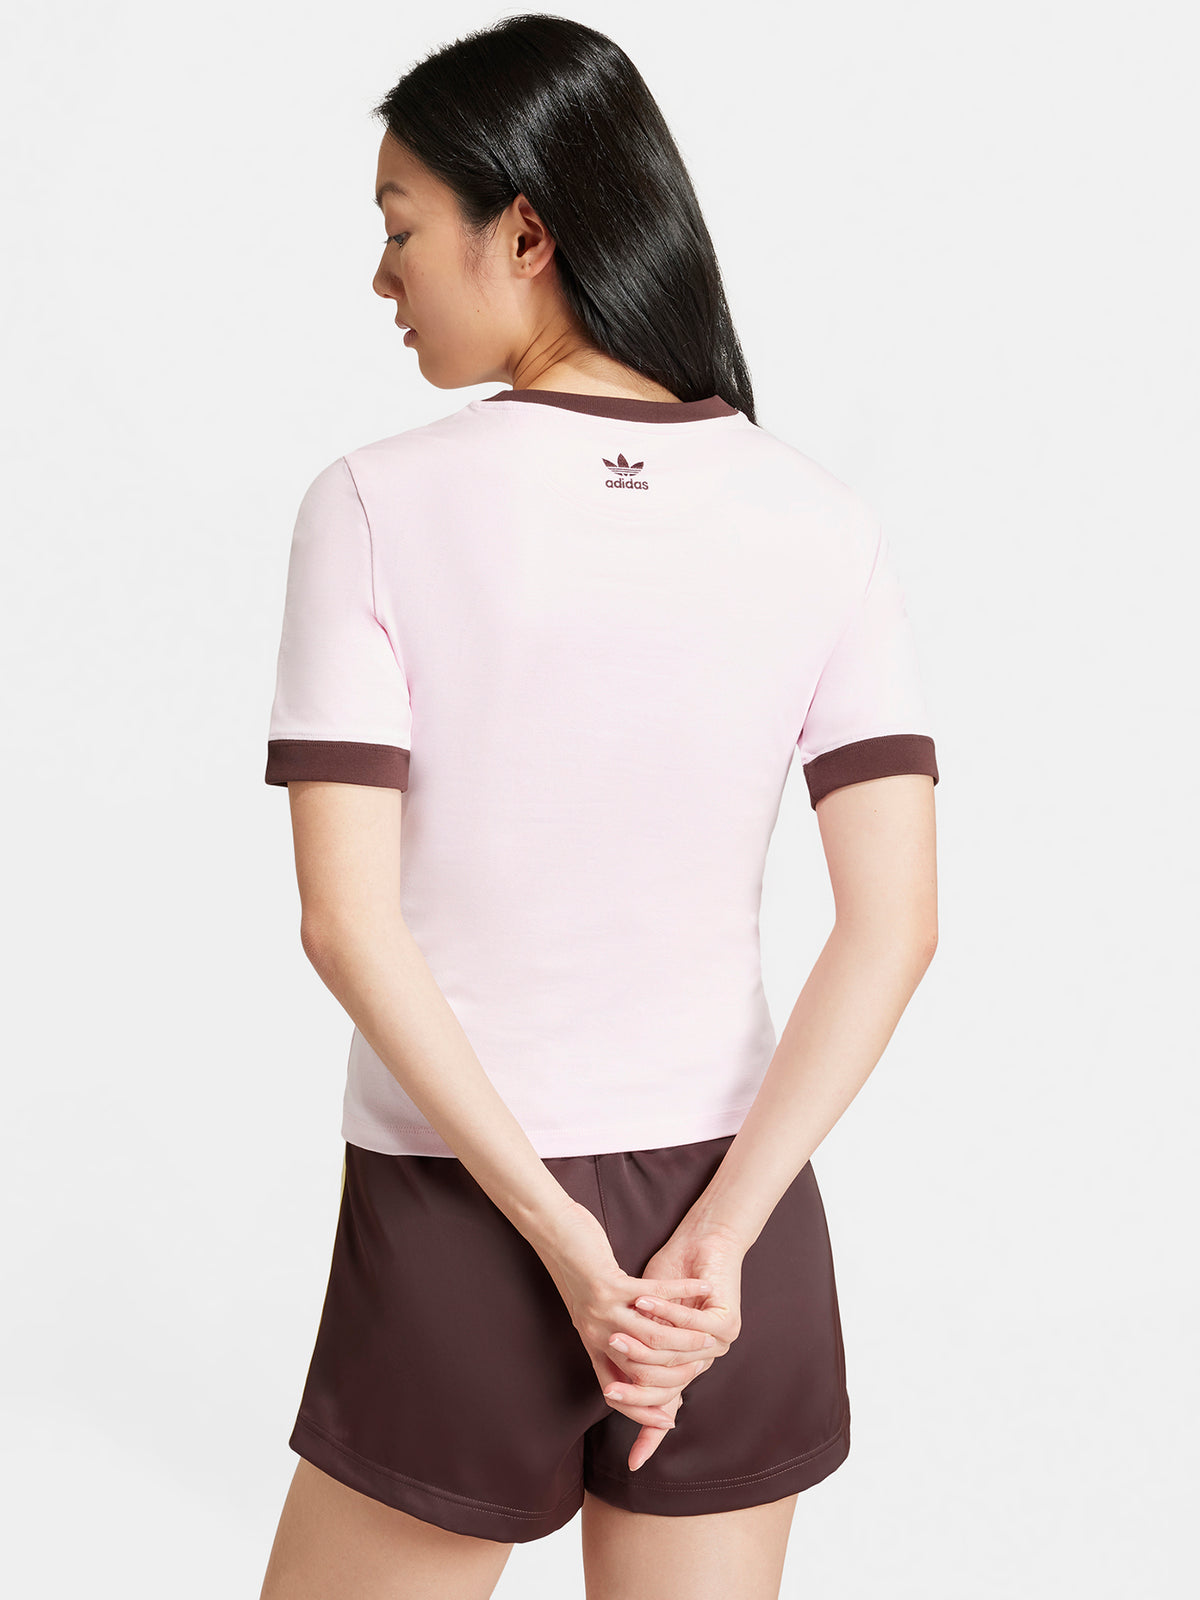 Retro GRX T-Shirt in Clear Pink